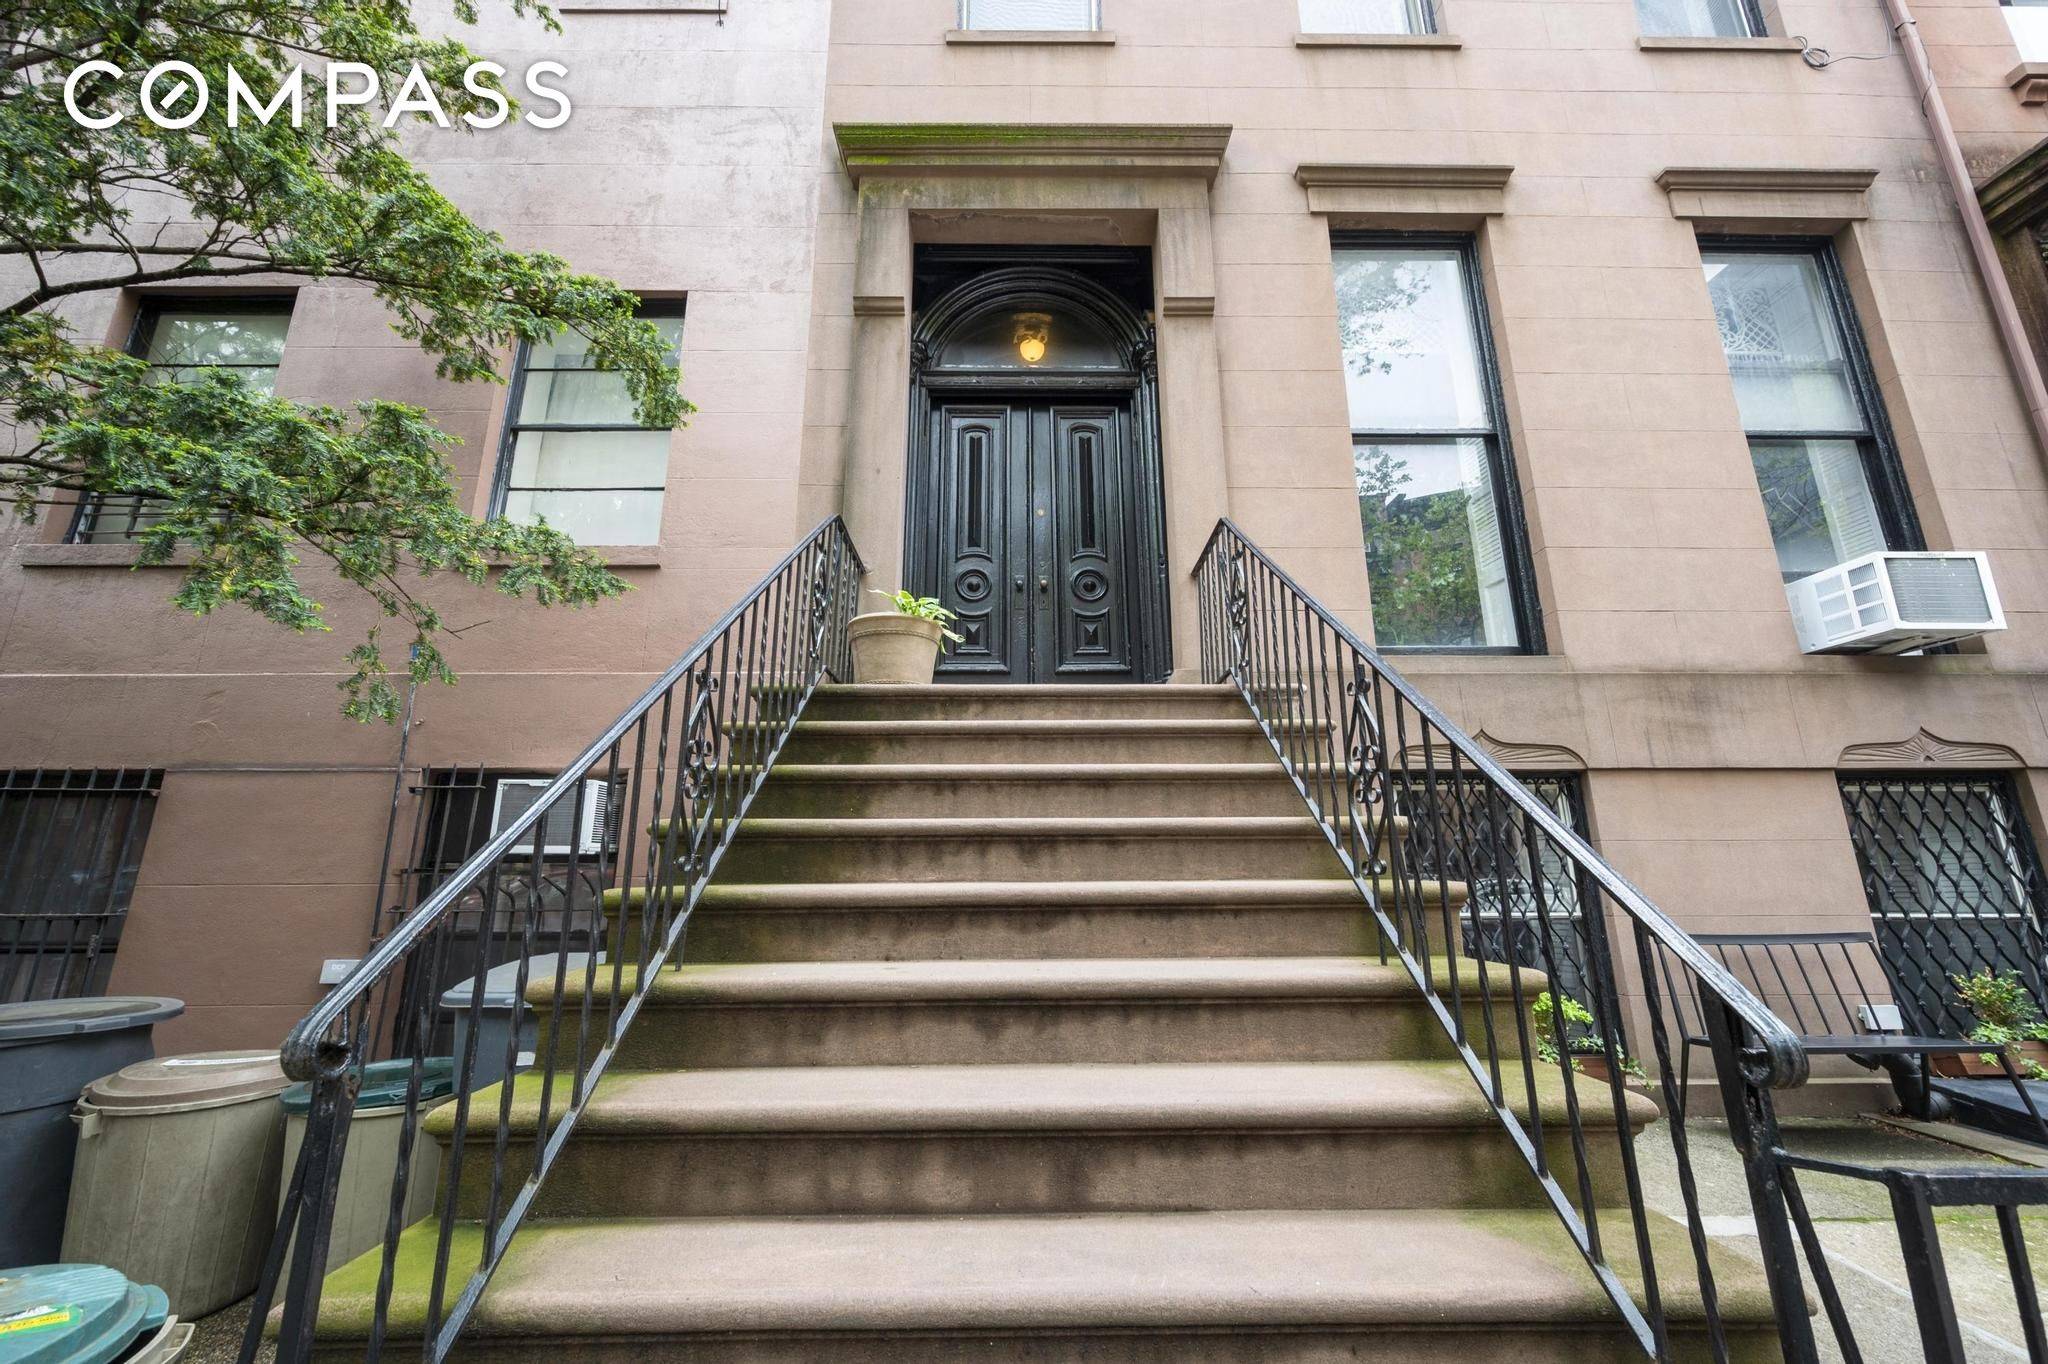 Welcome to 136 Amity St. This located on one of the best blocks in Cobble Hill.